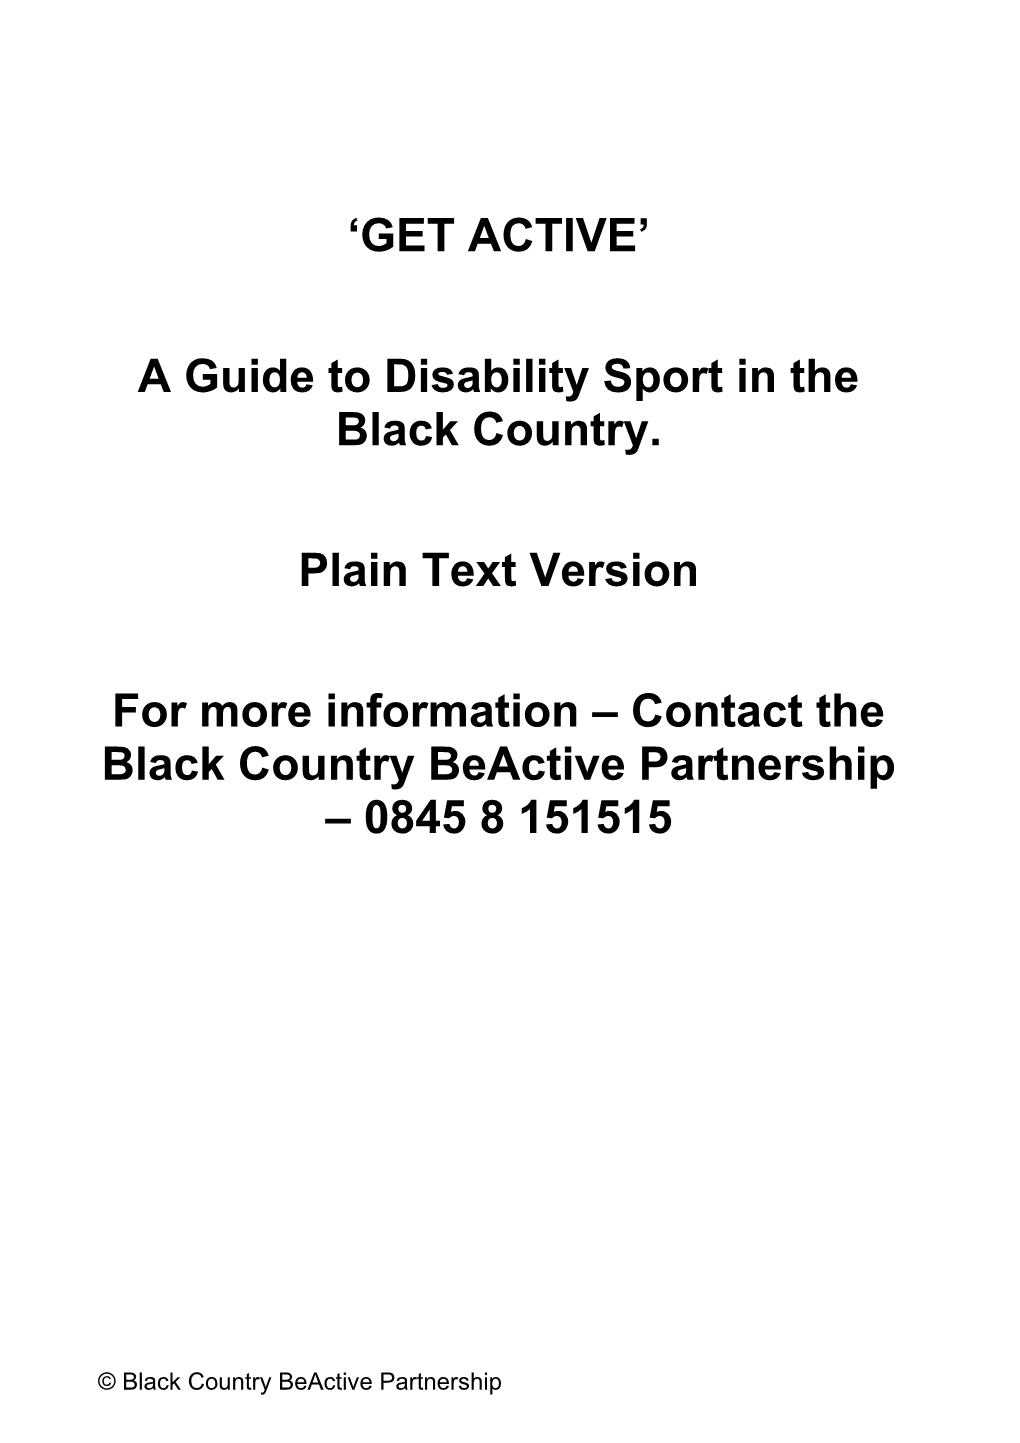 A Guide to Disability Sport in the Black Country